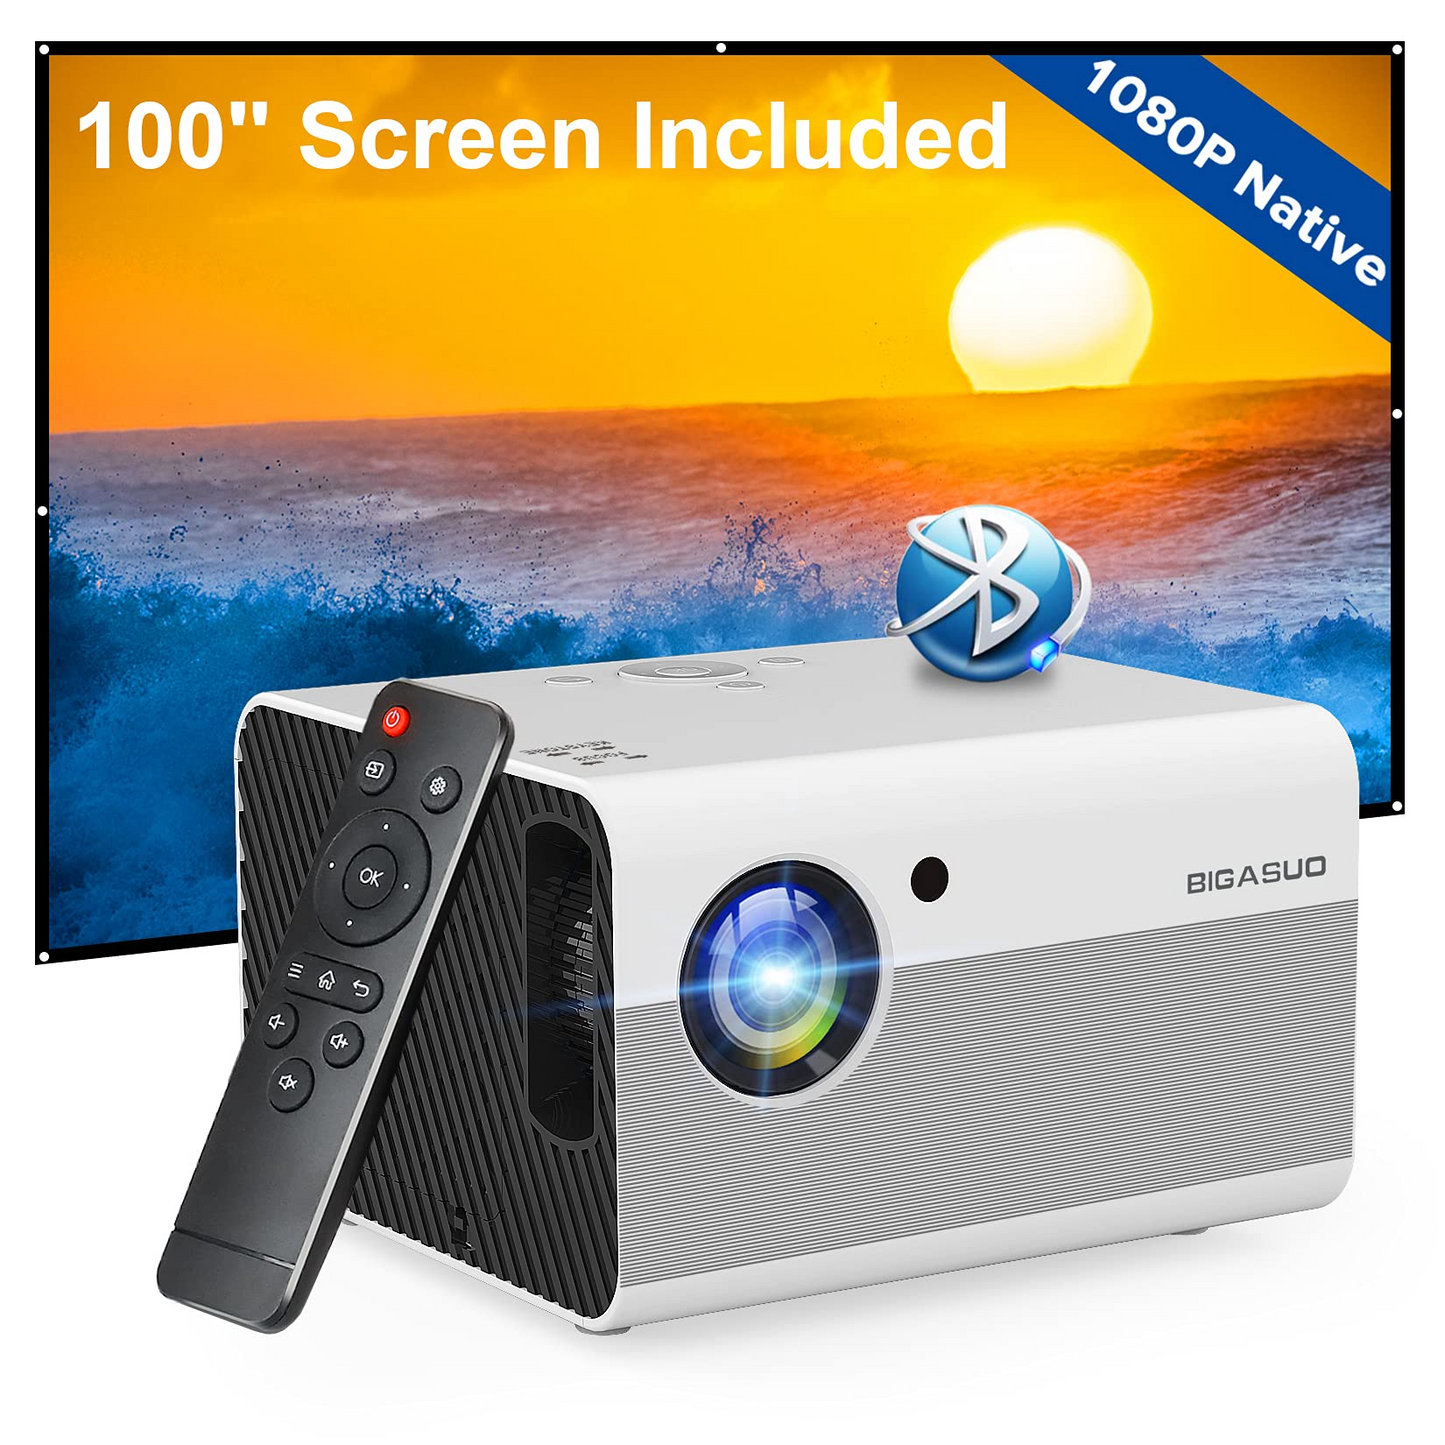 Native 1080P Projector Bluetooth with Digital Zoom&HiFi Stereo, BIGASUO Outdoor Movie Projector, 8000L Home Portable Projector Compatible HDMI,USB,AV,TV[100''Screen Included]